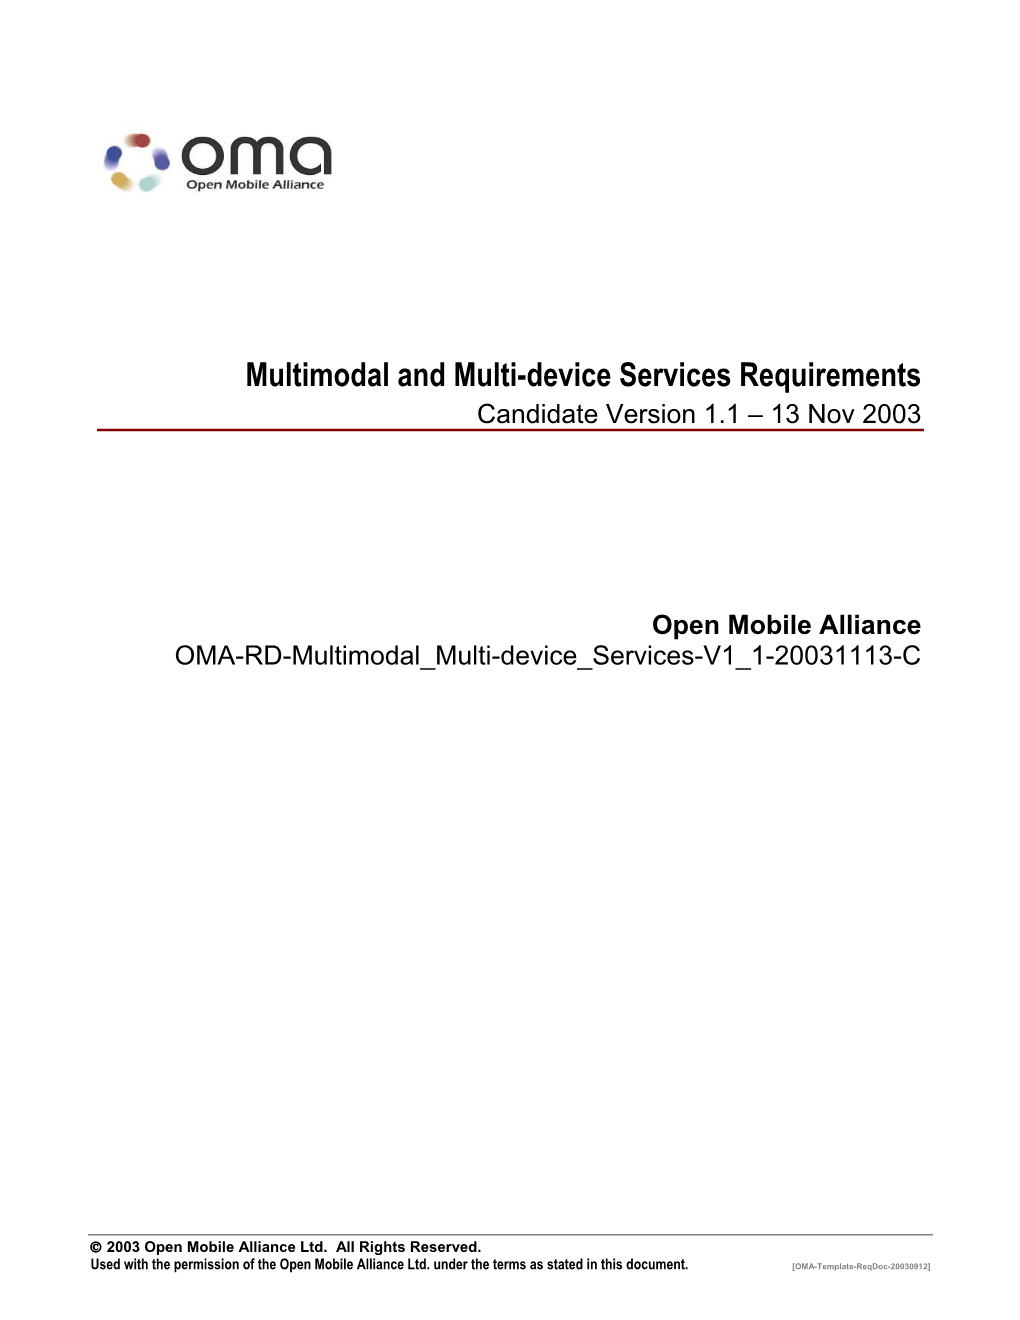 Multimodal and Multi-Device Services Requirements Candidate Version 1.1 – 13 Nov 2003